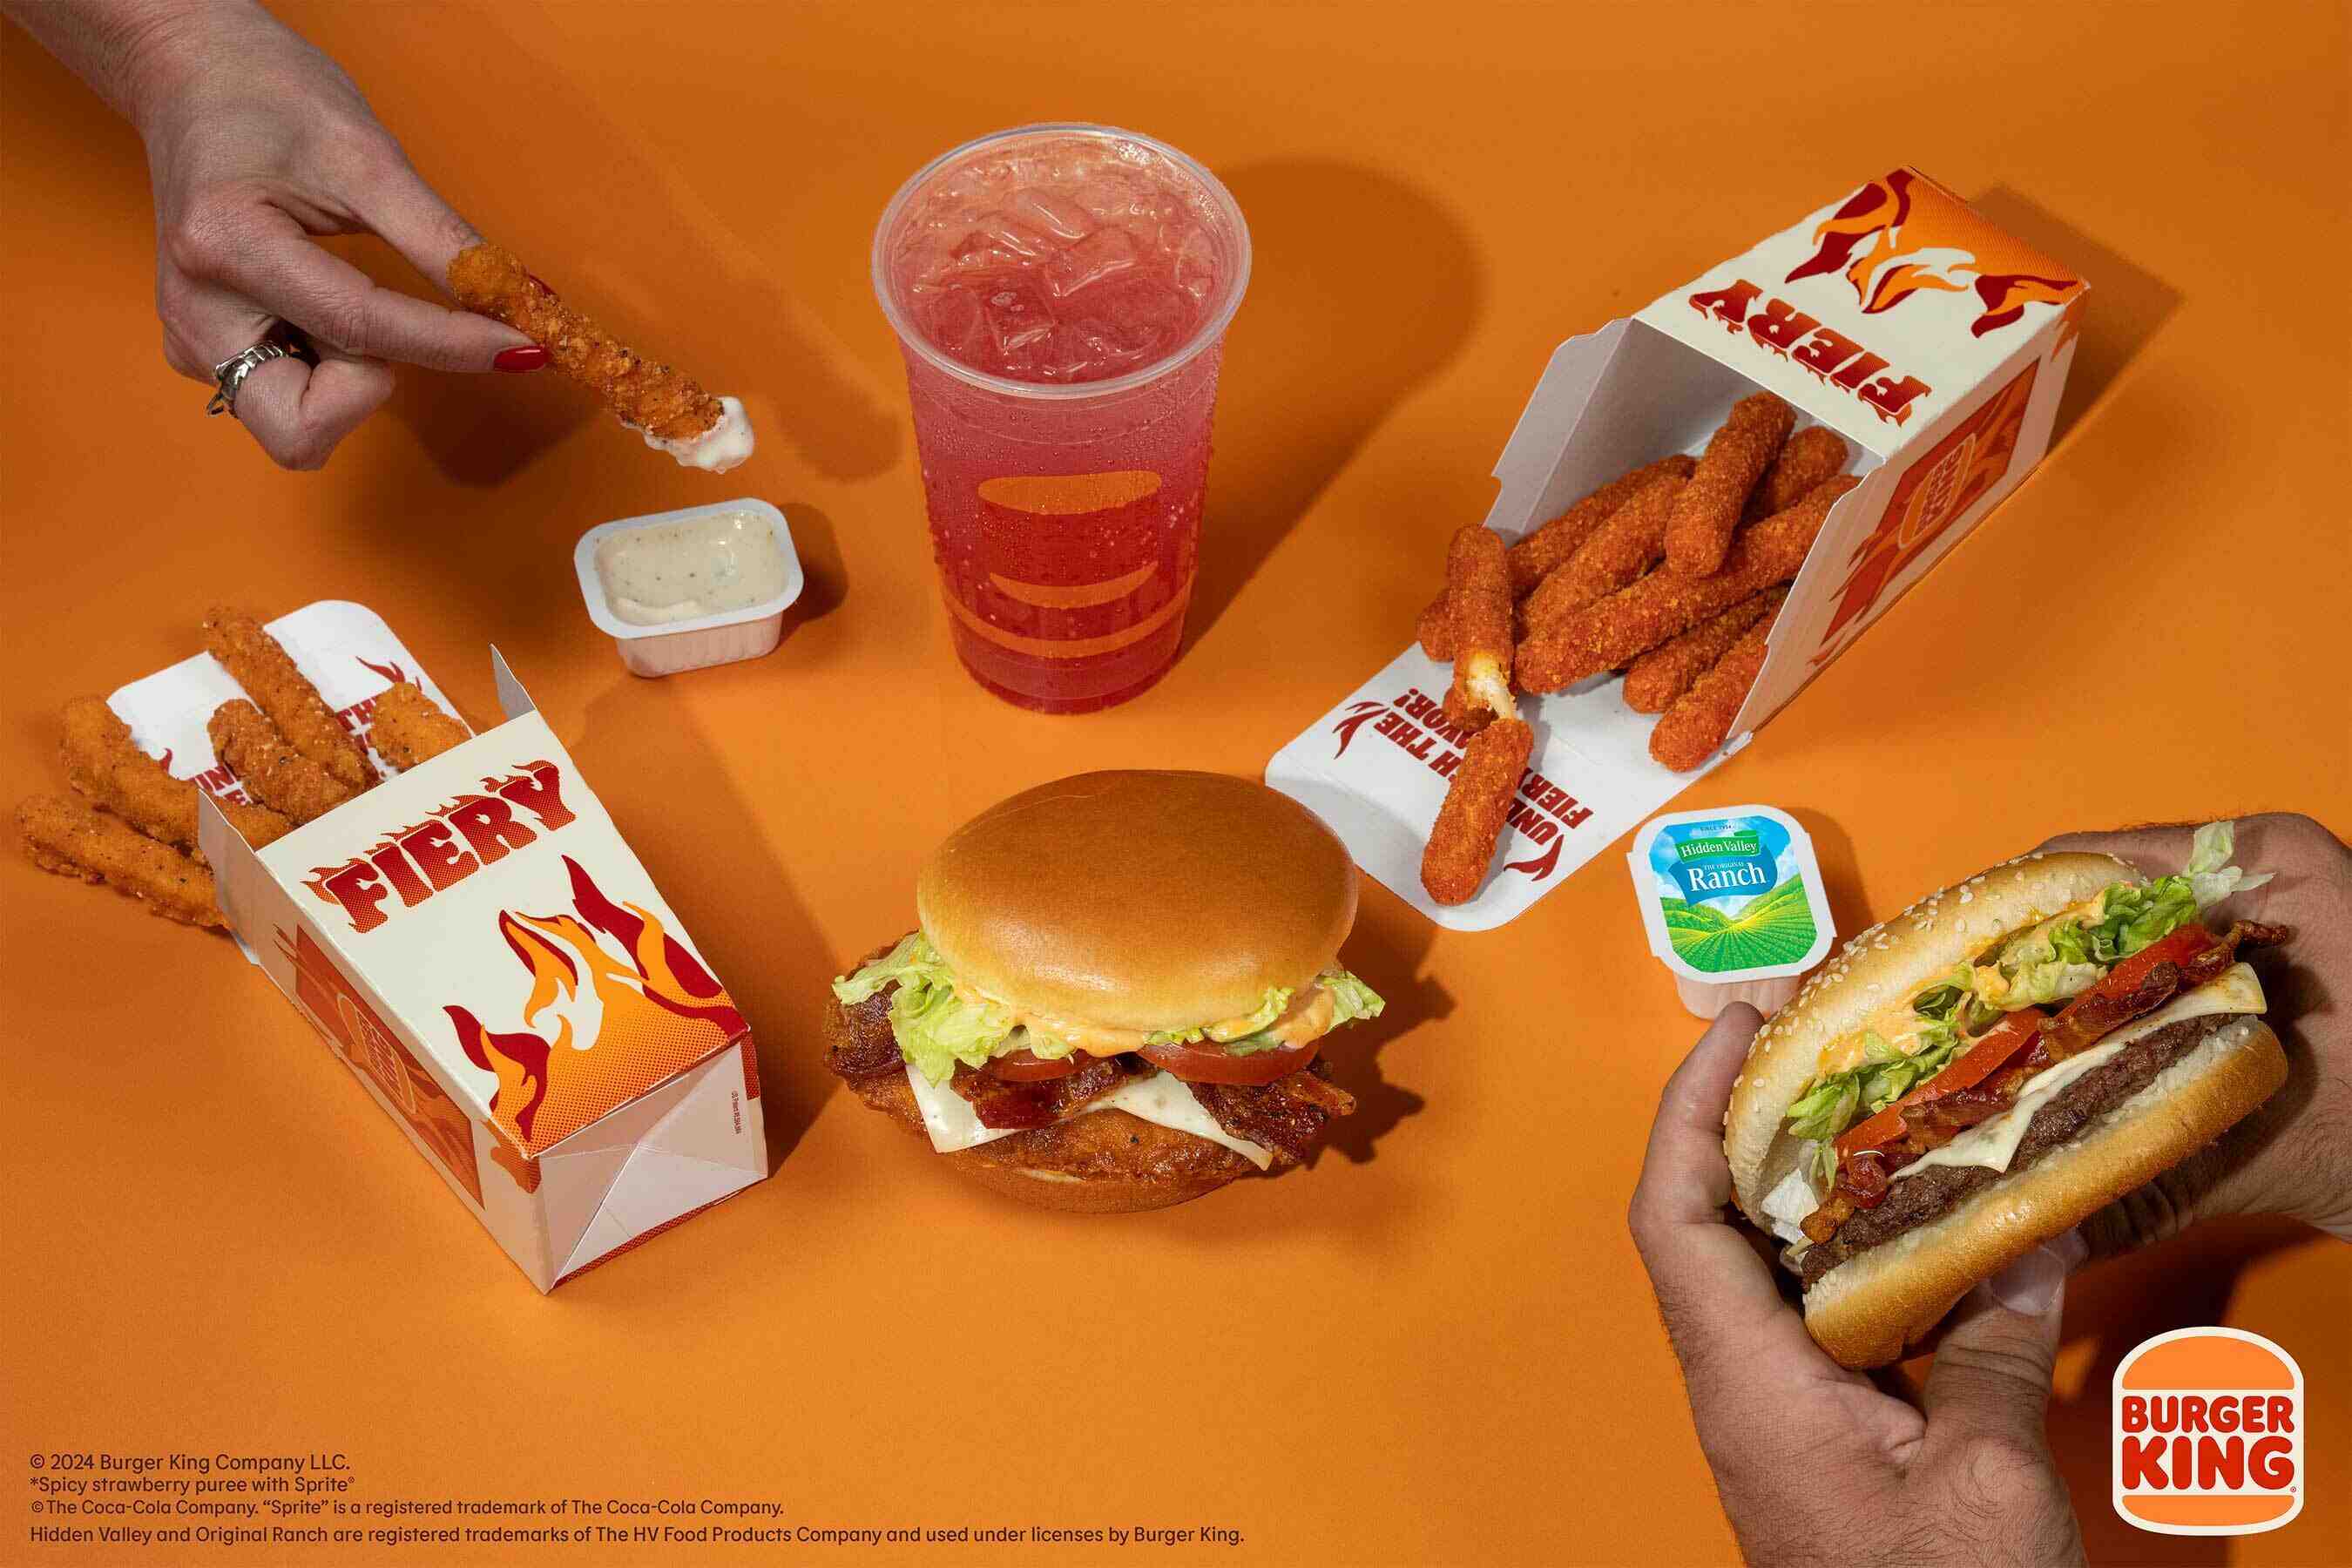 Burger King Cranks Up The Heat With A New 'Fiery Menu'